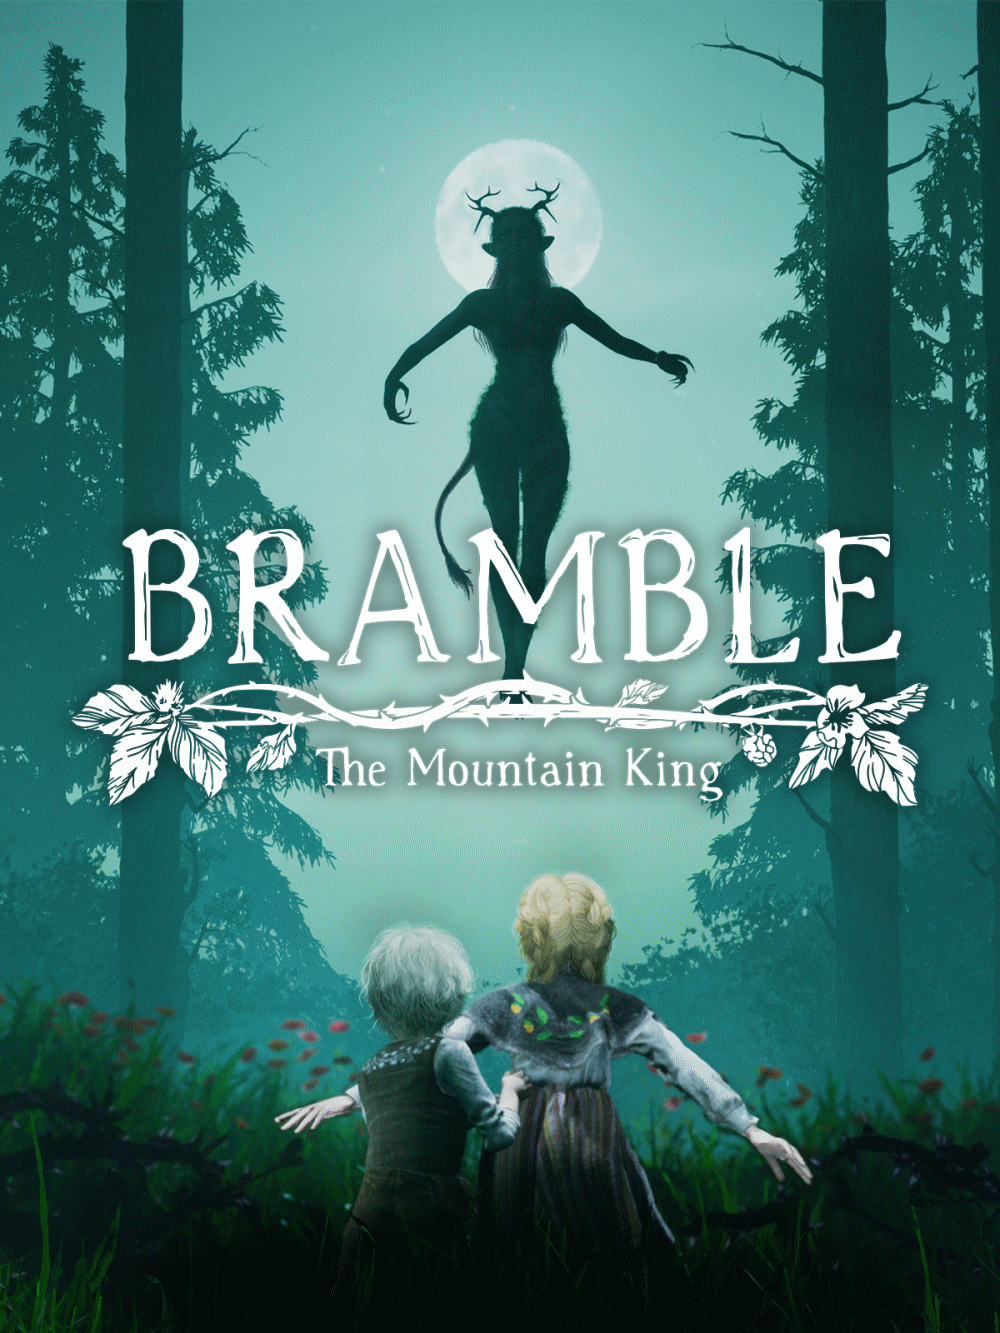 Bramble: The Mountain King. Price, Review, System Requirements, Download